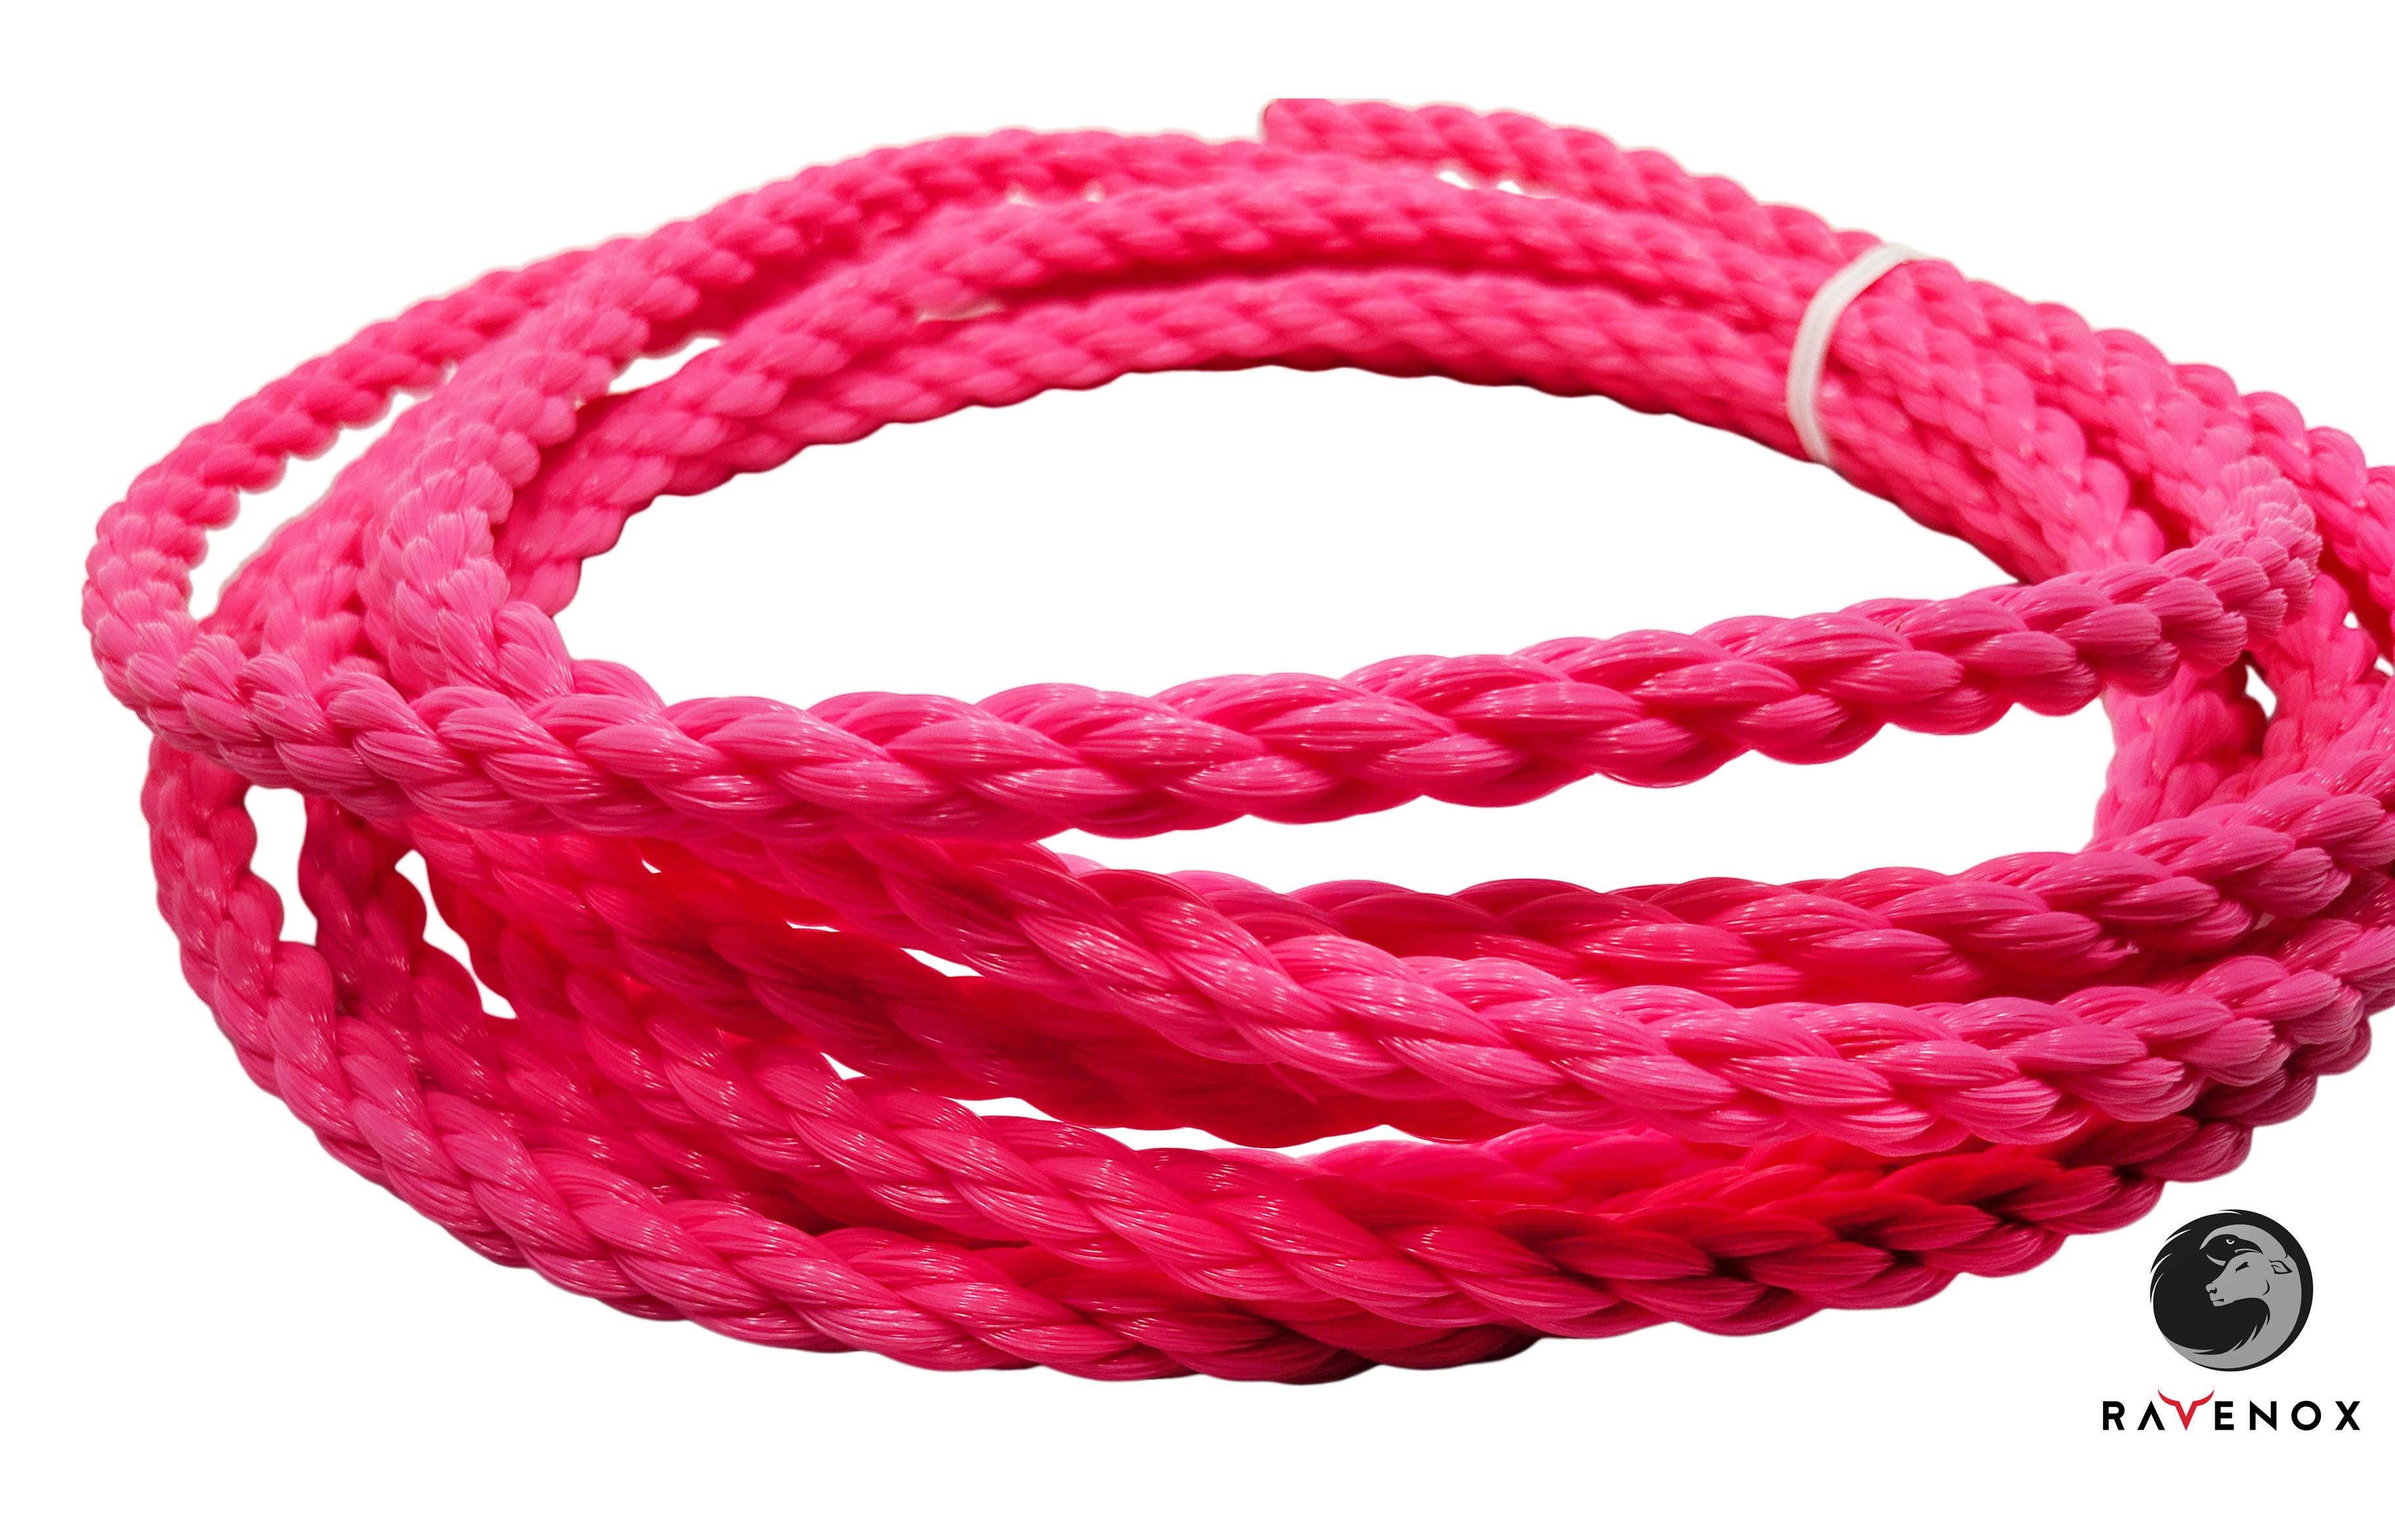 Hot Pink Twisted Polypropylene Ropes | Thick & Colorful Cordage 3/8-Inch x 25-Feet